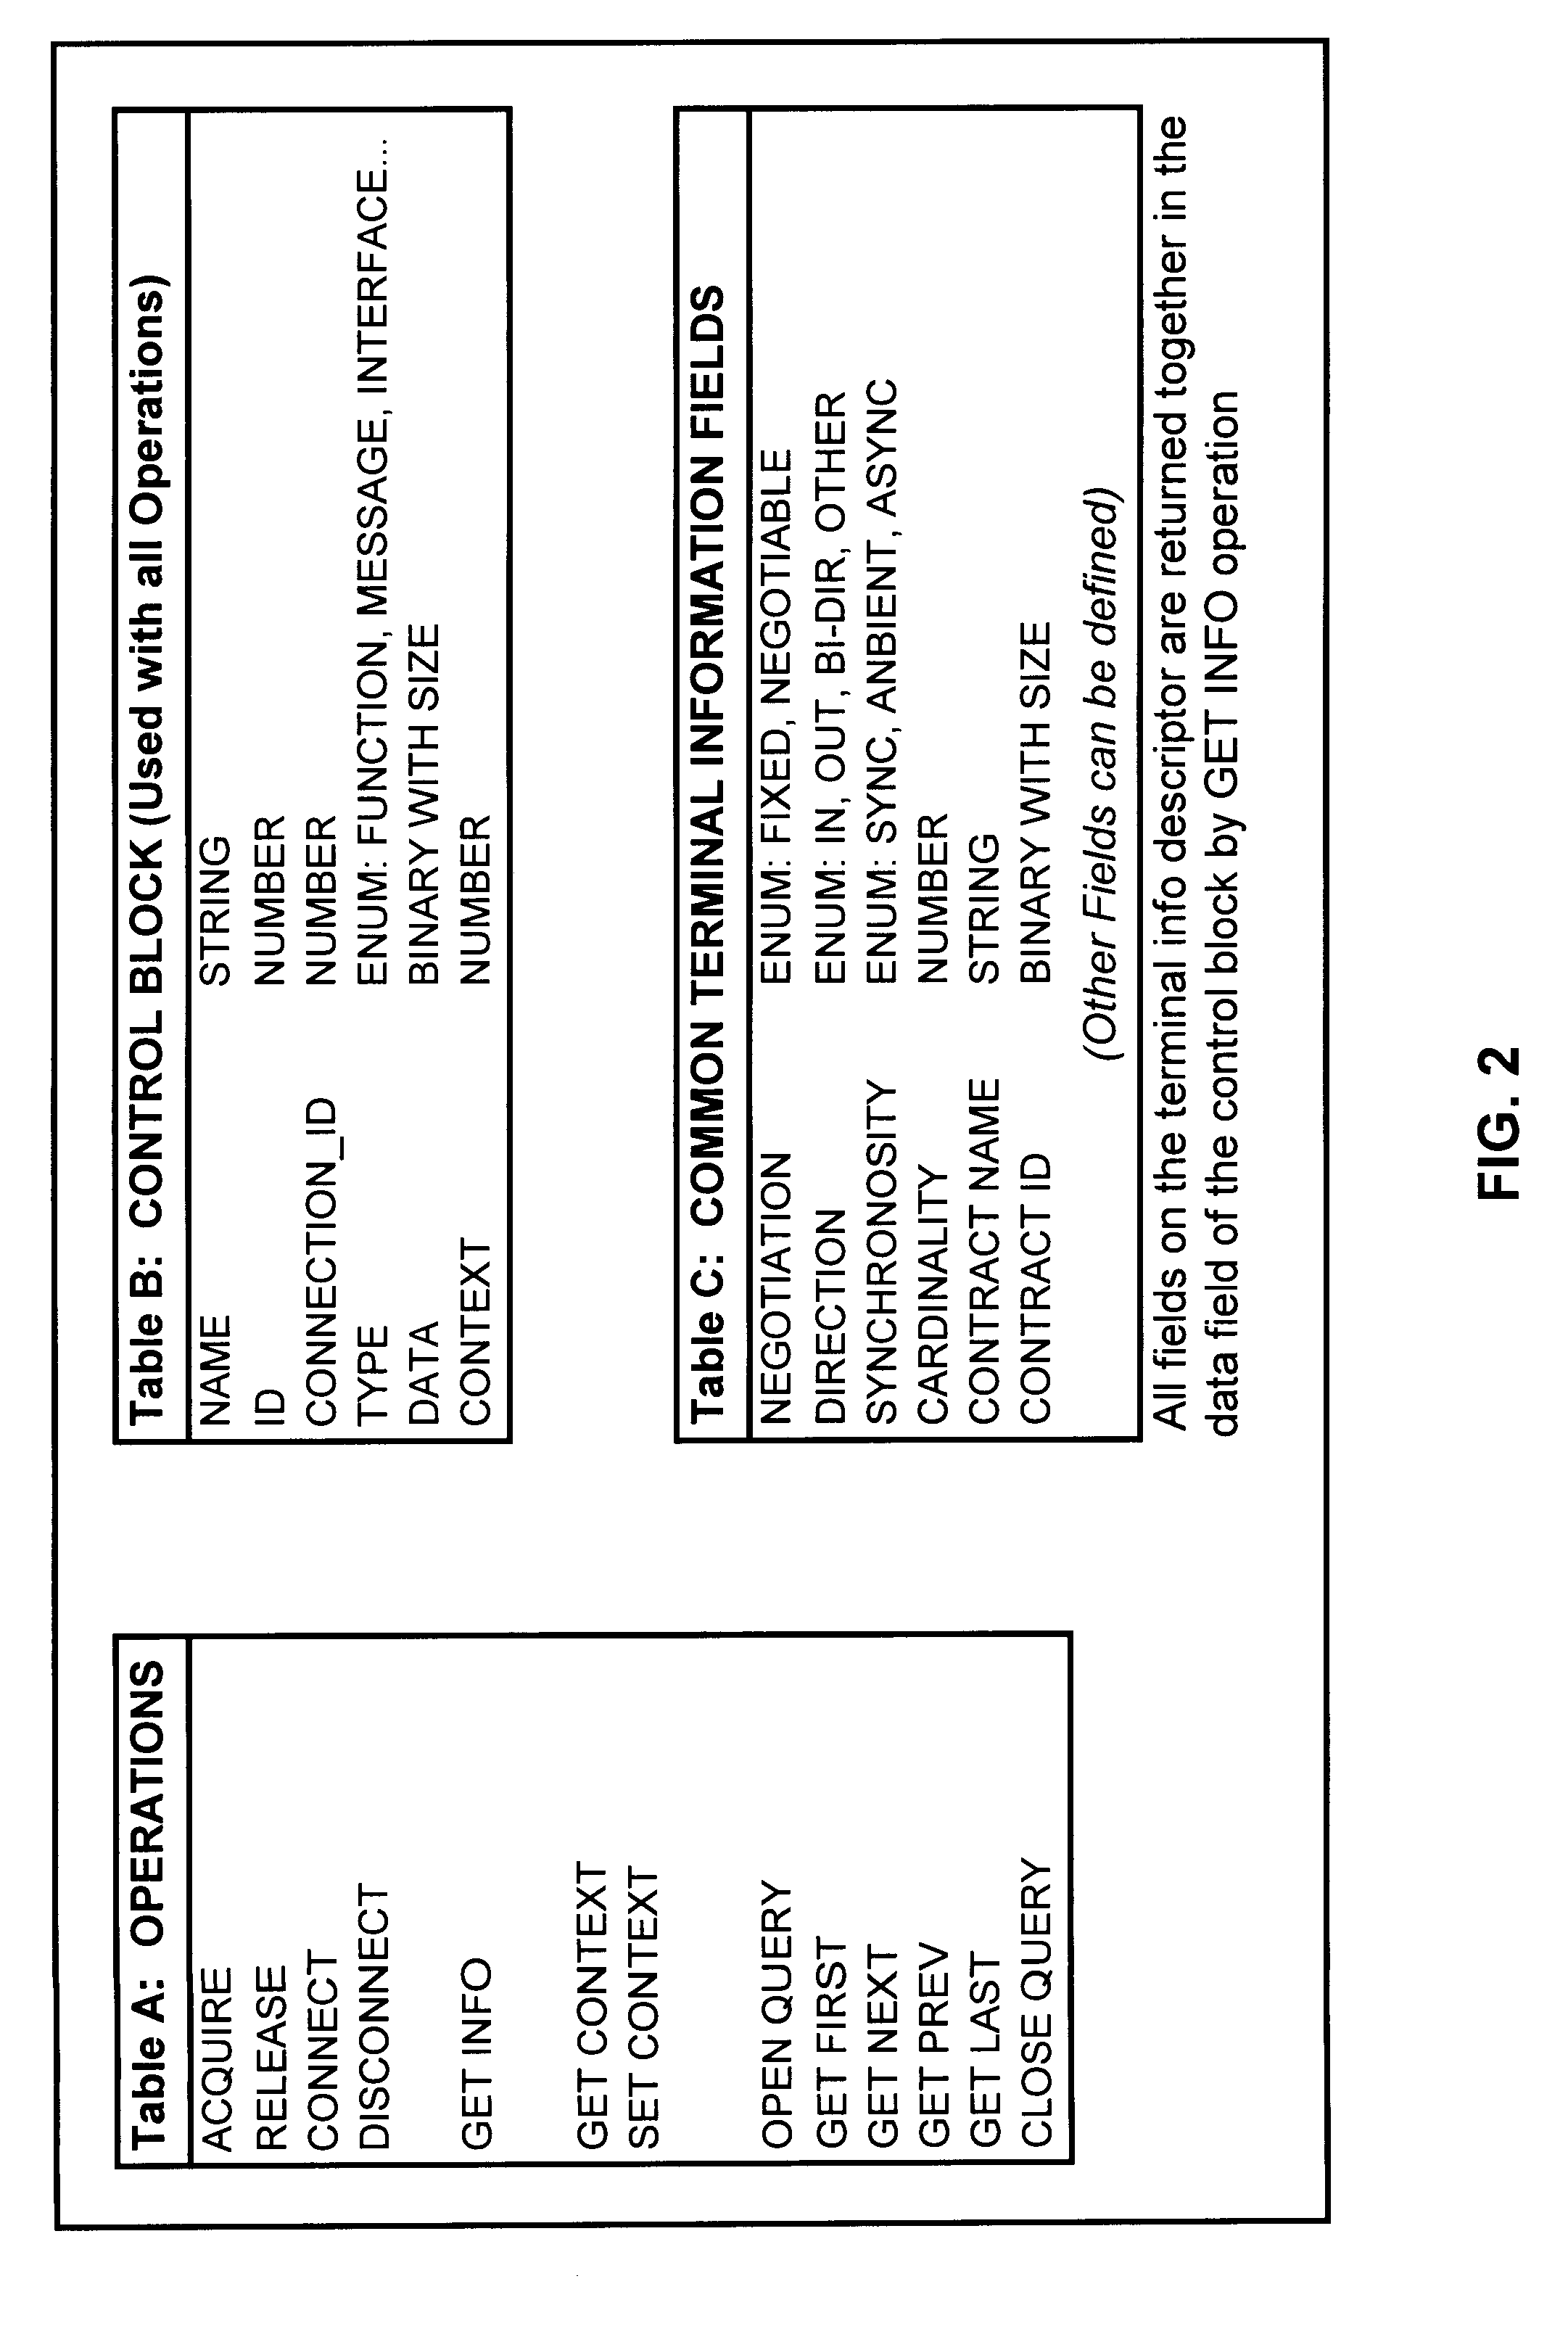 Method and system for constructing software components and systems as assemblies of independent parts